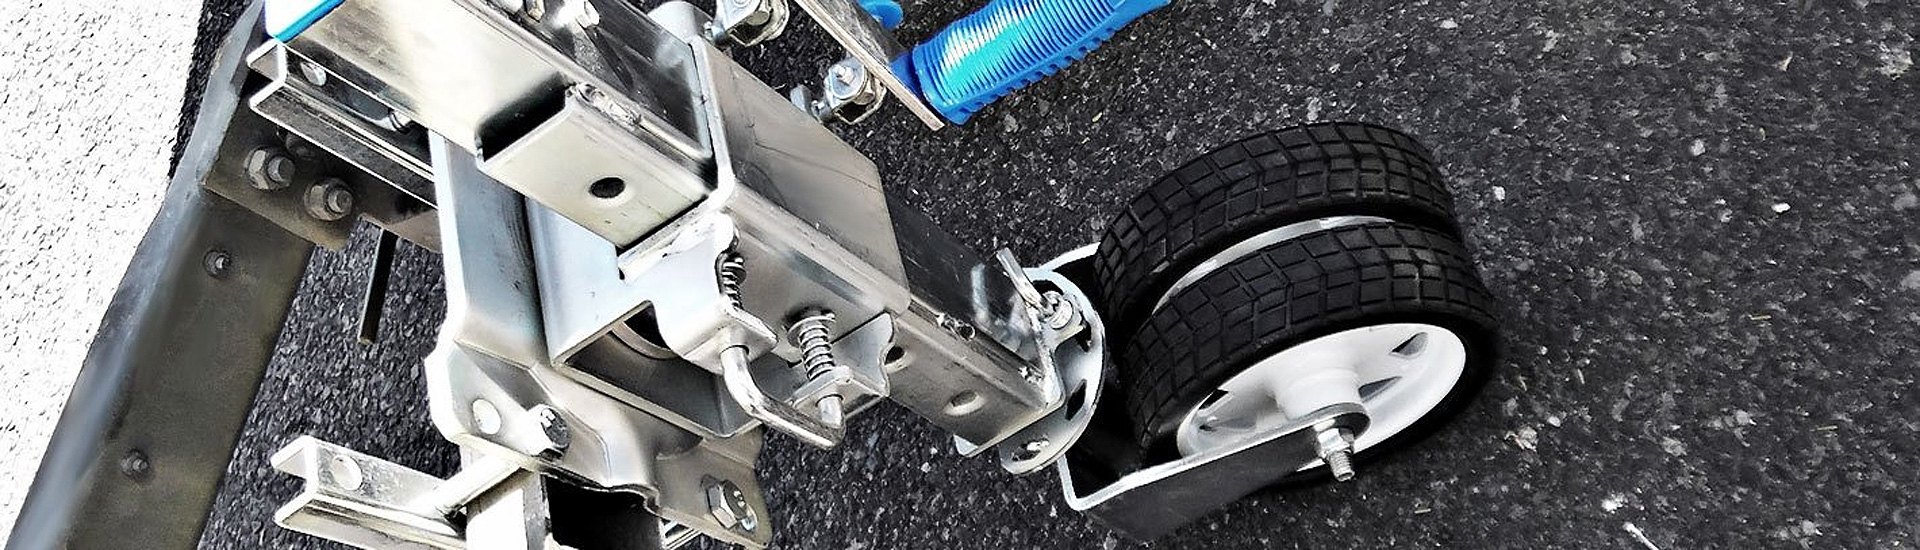 Trailer Jacks Keep Your Load Level and Secure